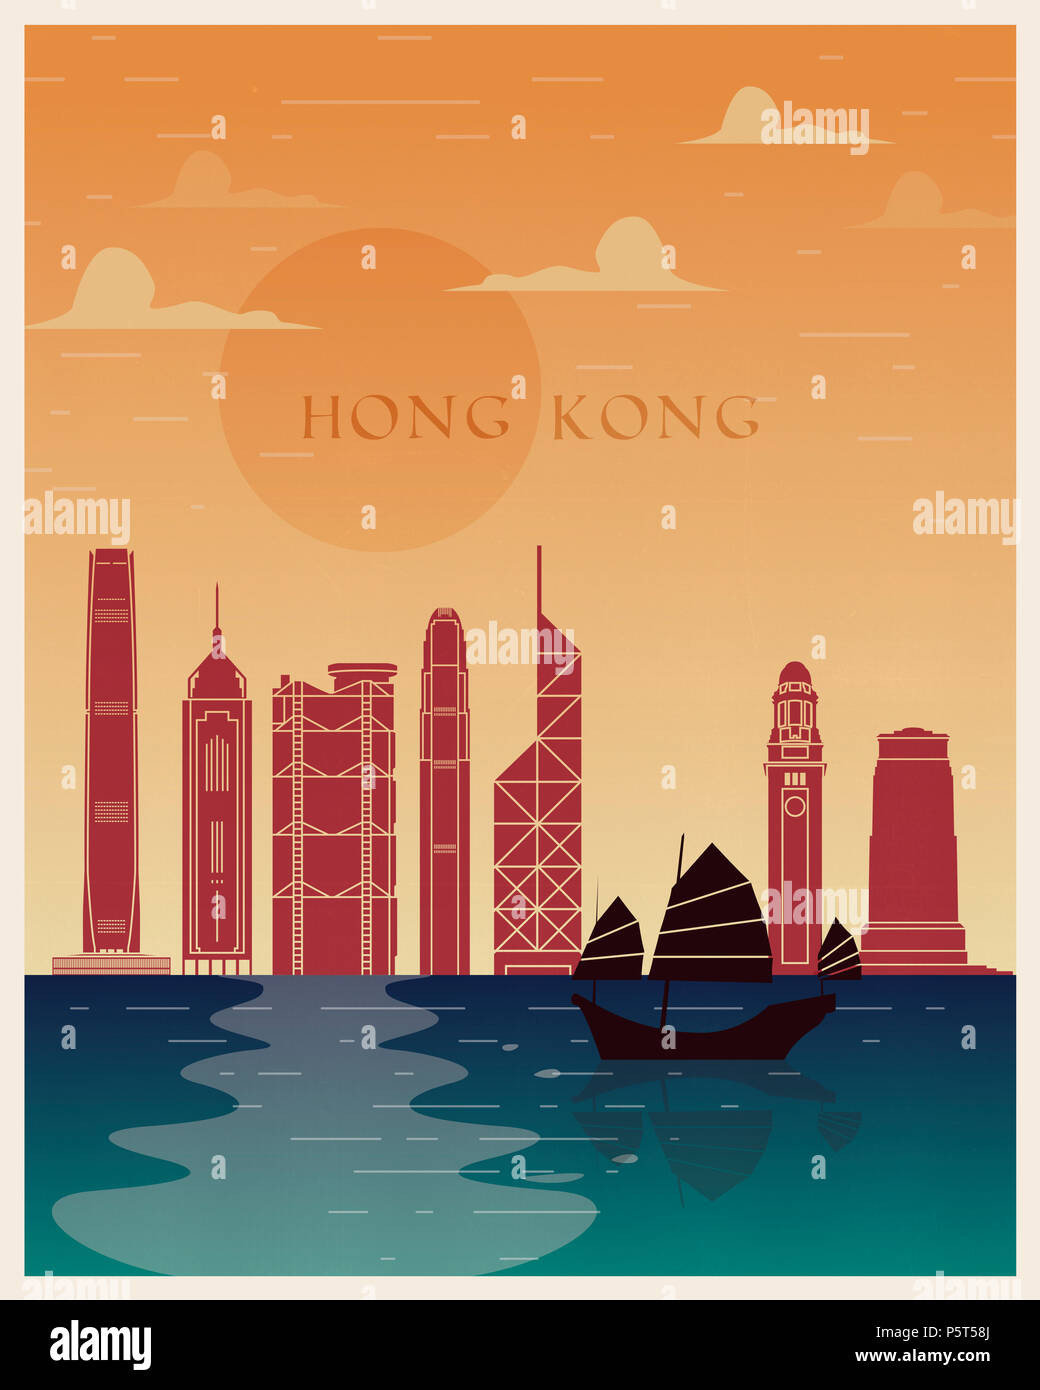 Alamy poster hi-res stock kong photography - Hong and images